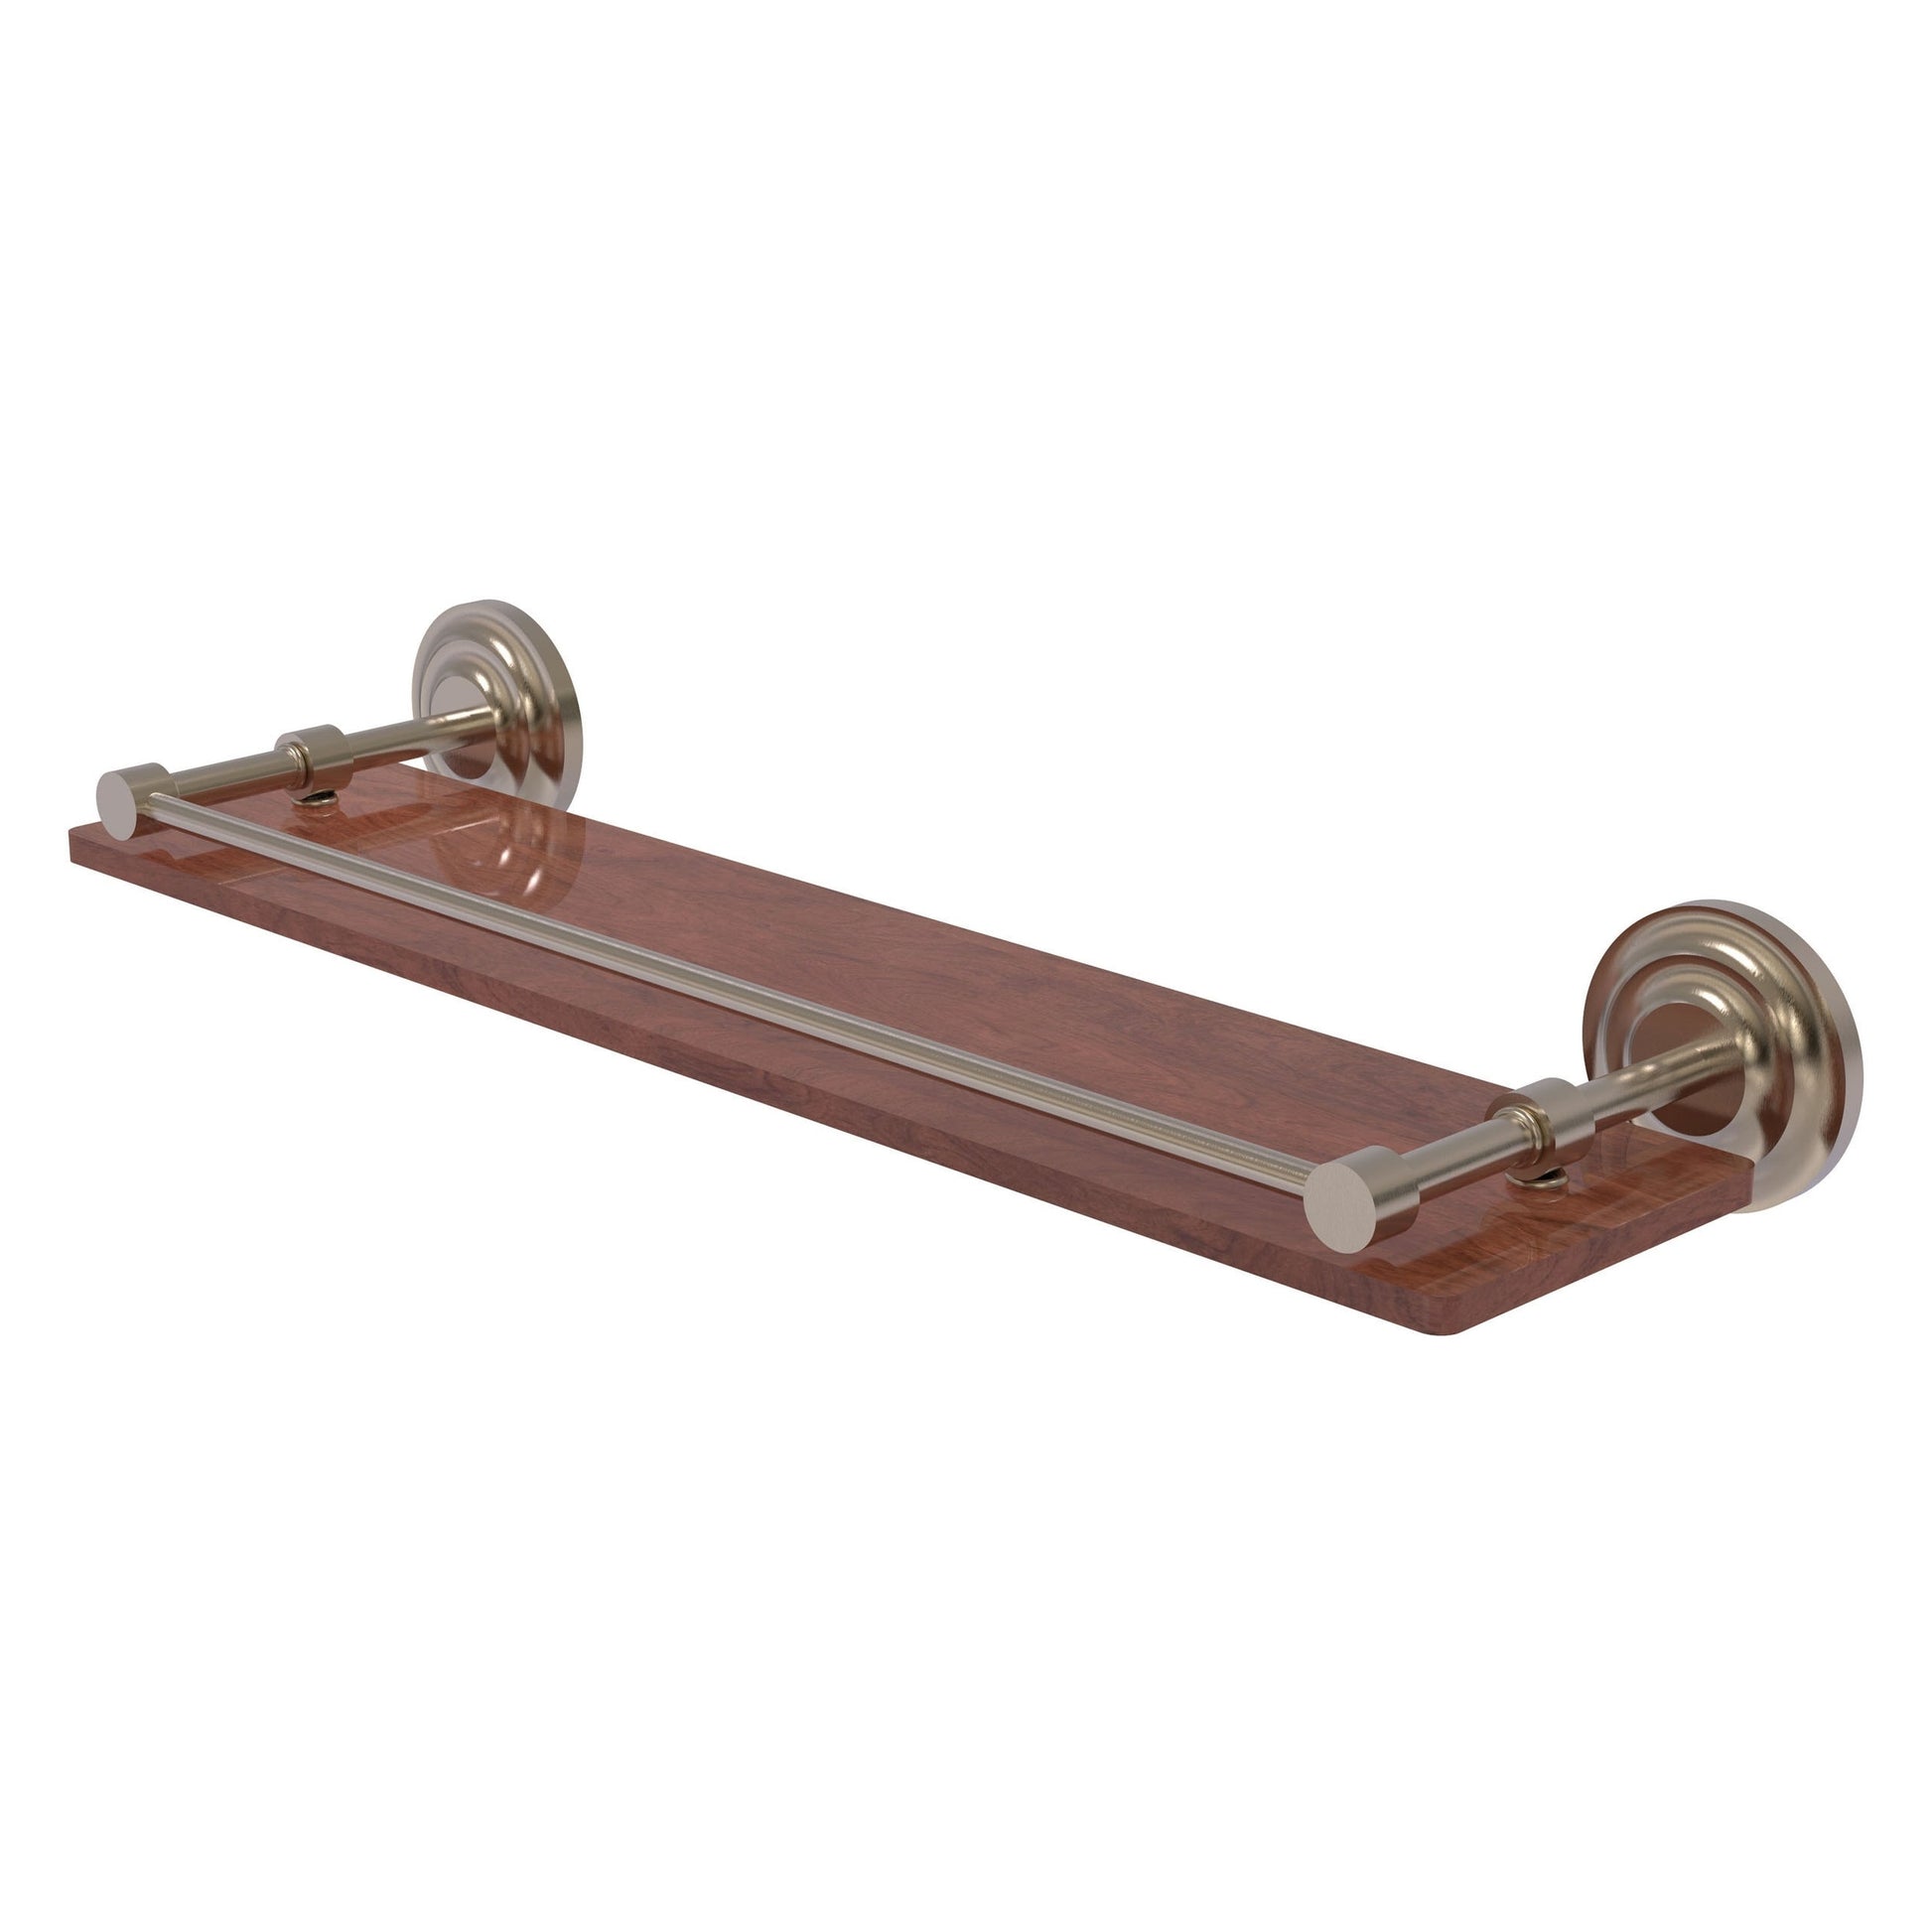 Allied Brass Que New 22" x 5" Antique Pewter Solid Brass 22-Inch Solid IPE Ironwood Shelf With Gallery Rail